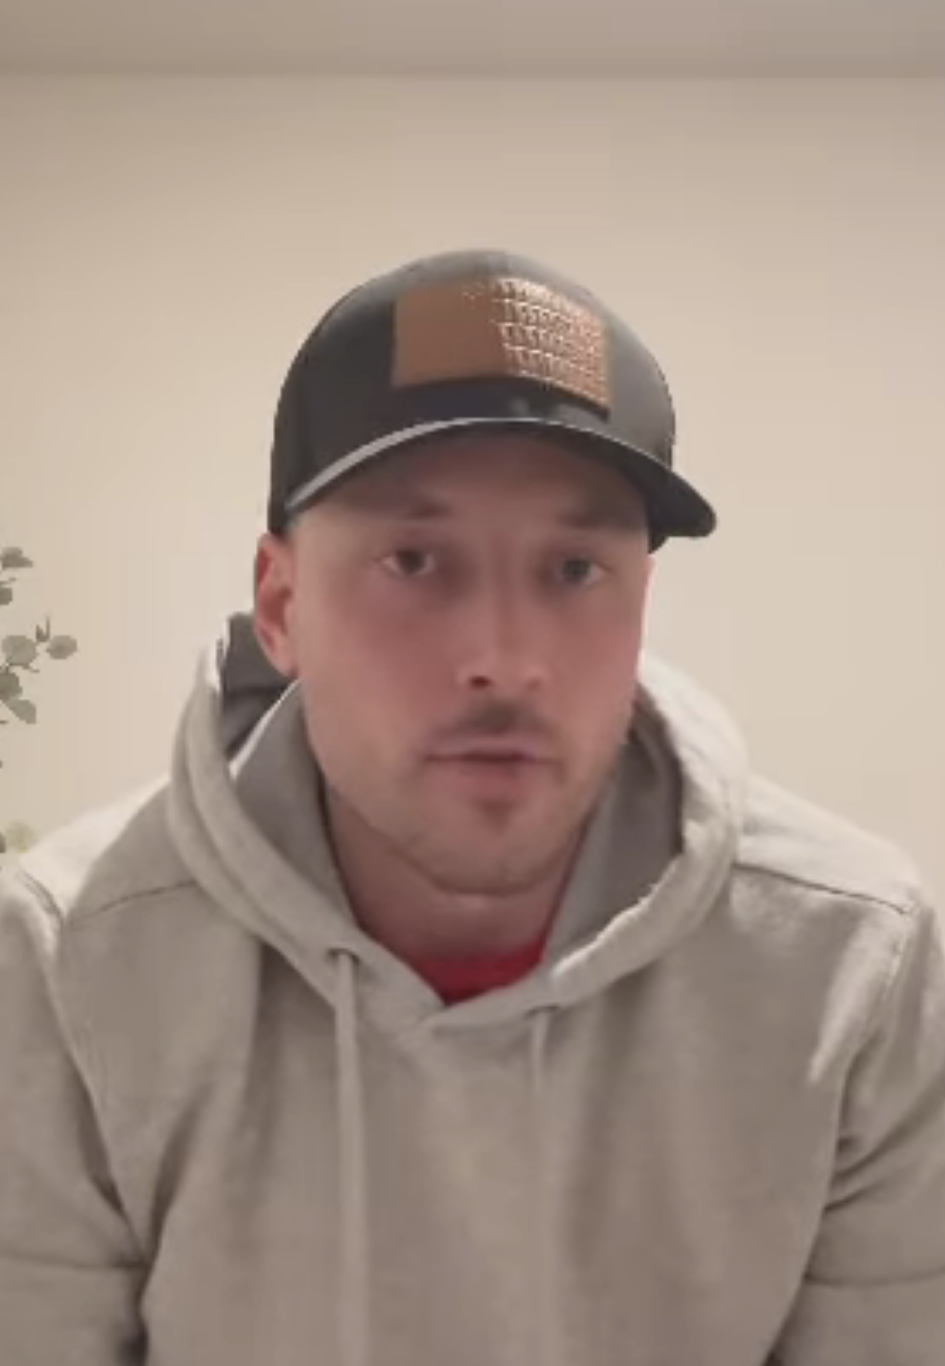 Jeremy in a cap and hoodie sits in front of a computer, looking into the camera, with a pensive expression